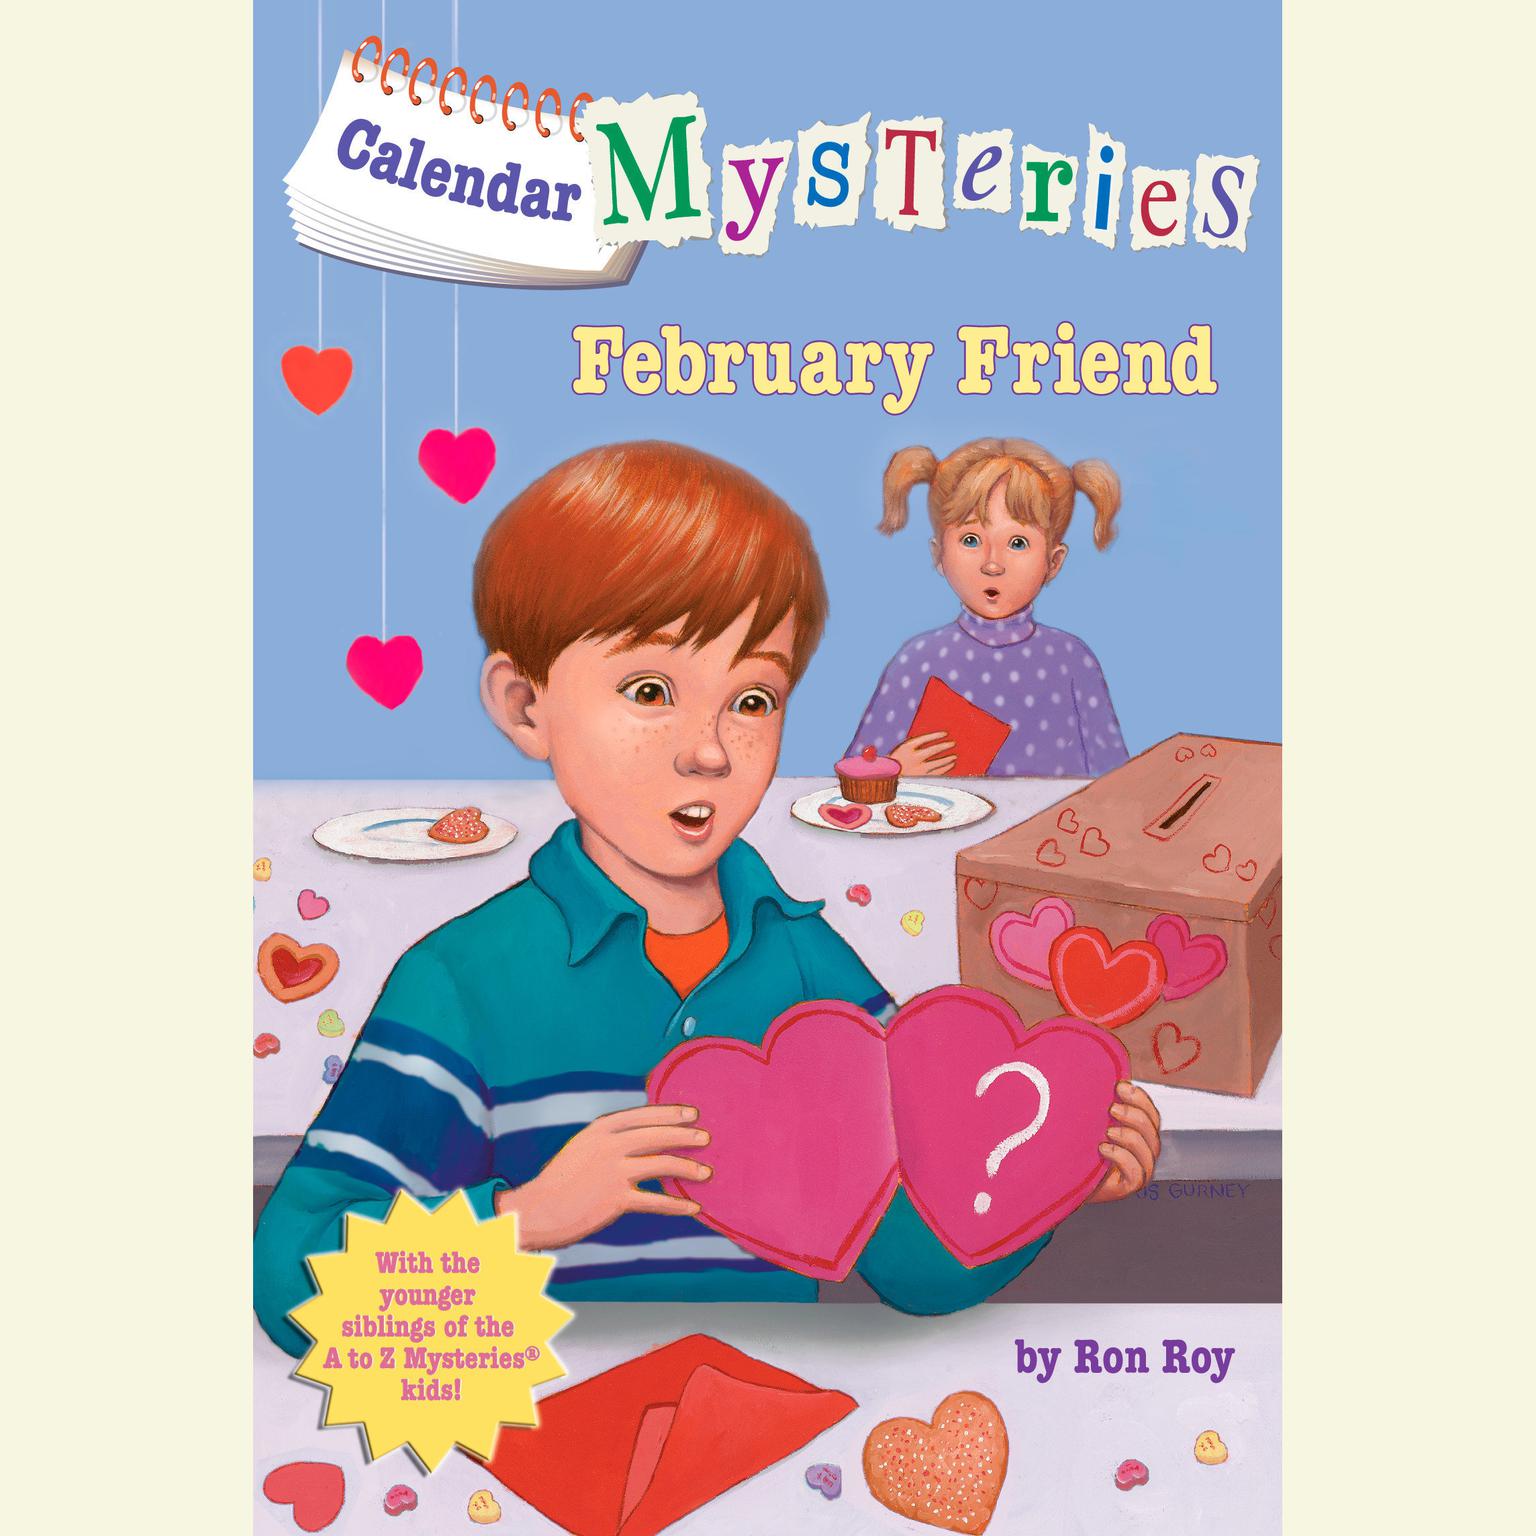 Calendar Mysteries #2: February Friend Audiobook, by Ron Roy